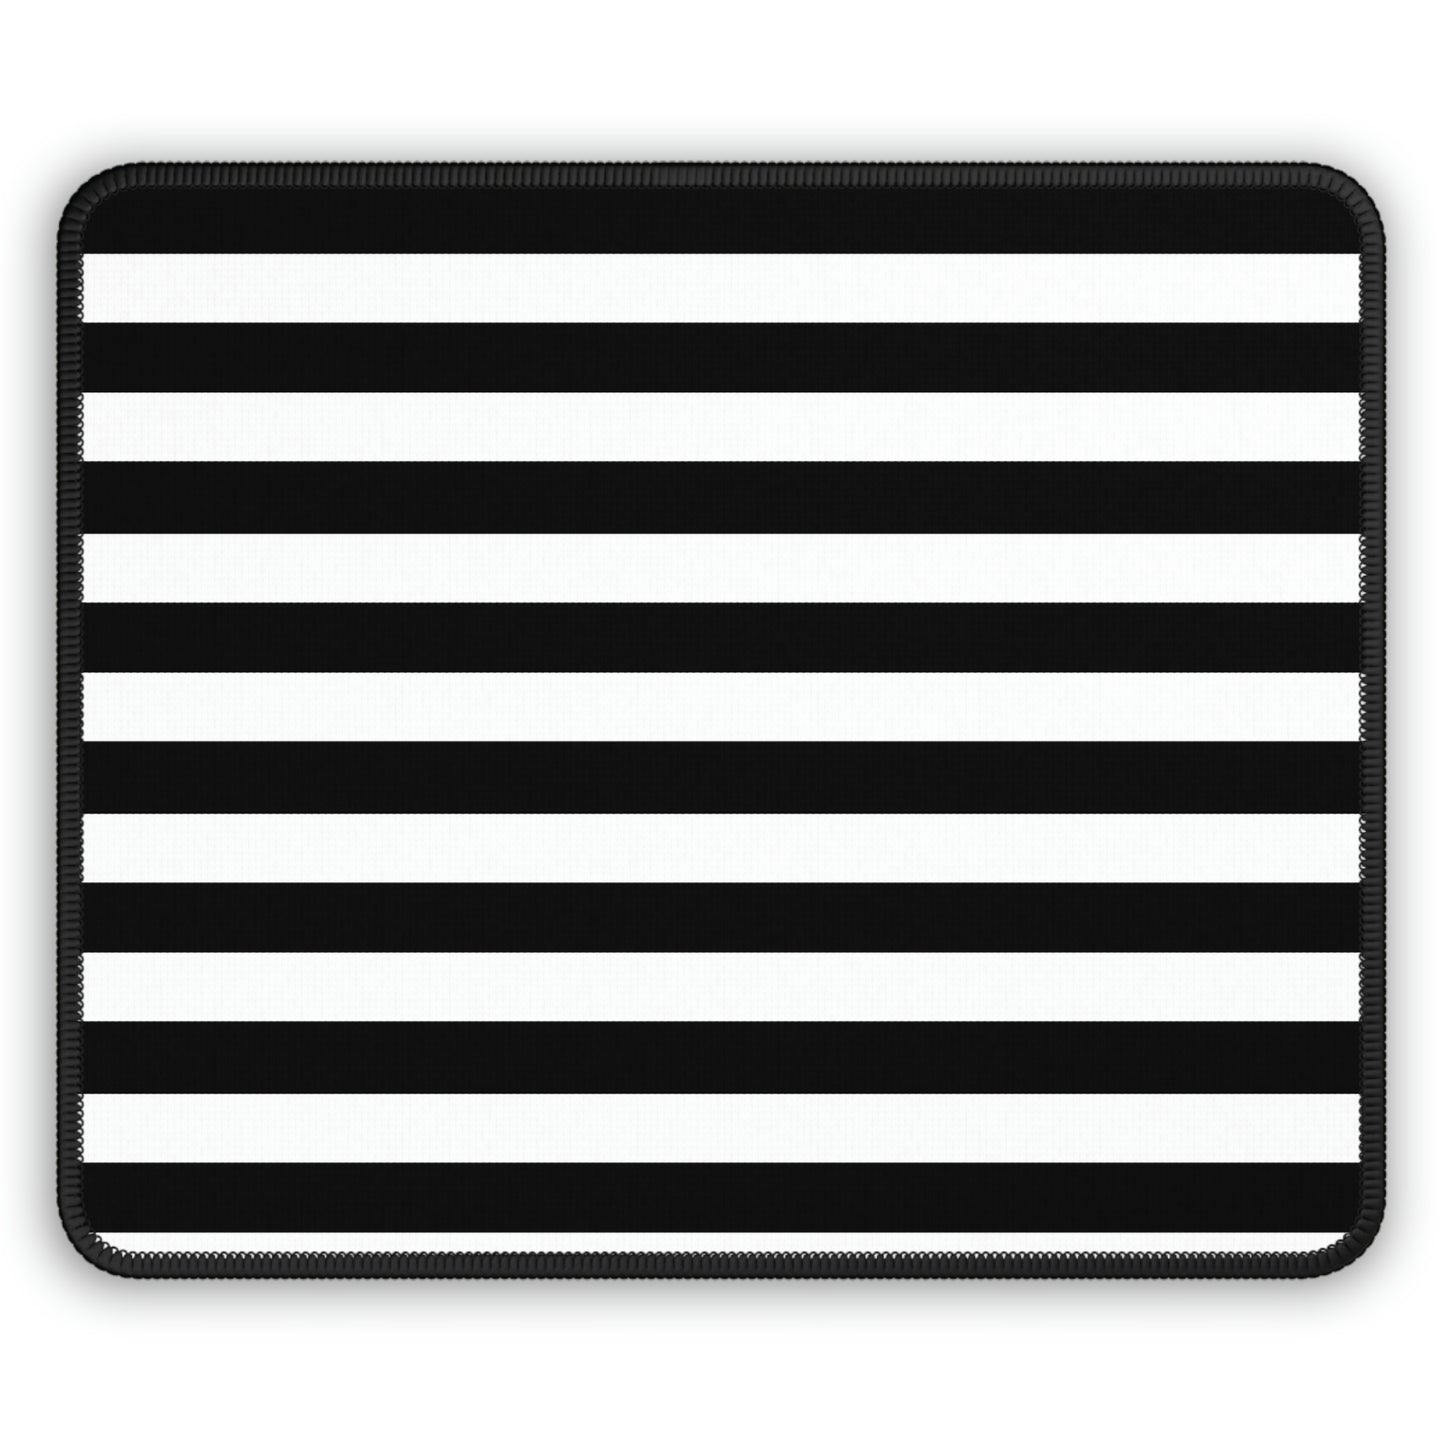 Black & White Striped Gaming Mouse Pad - Desk Cookies